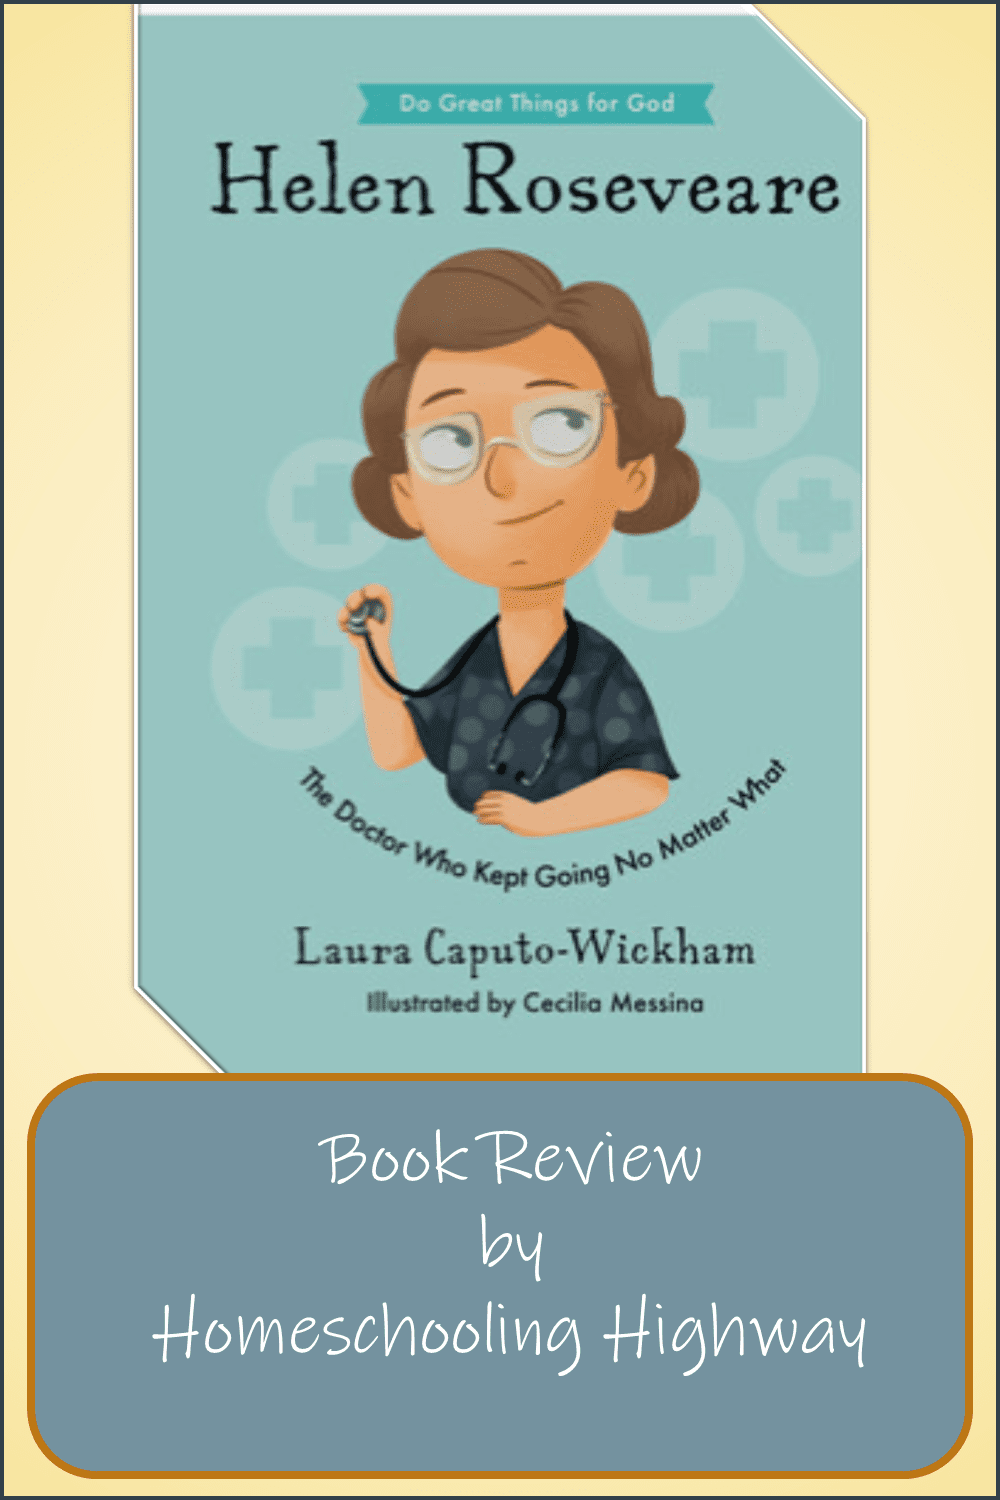 Cover Image of Laura Caputo-Wickham's book. Helen Roseveare: The Doctor Who Kept Going No Matter What. Book Reviewed by Homeschooling Highway